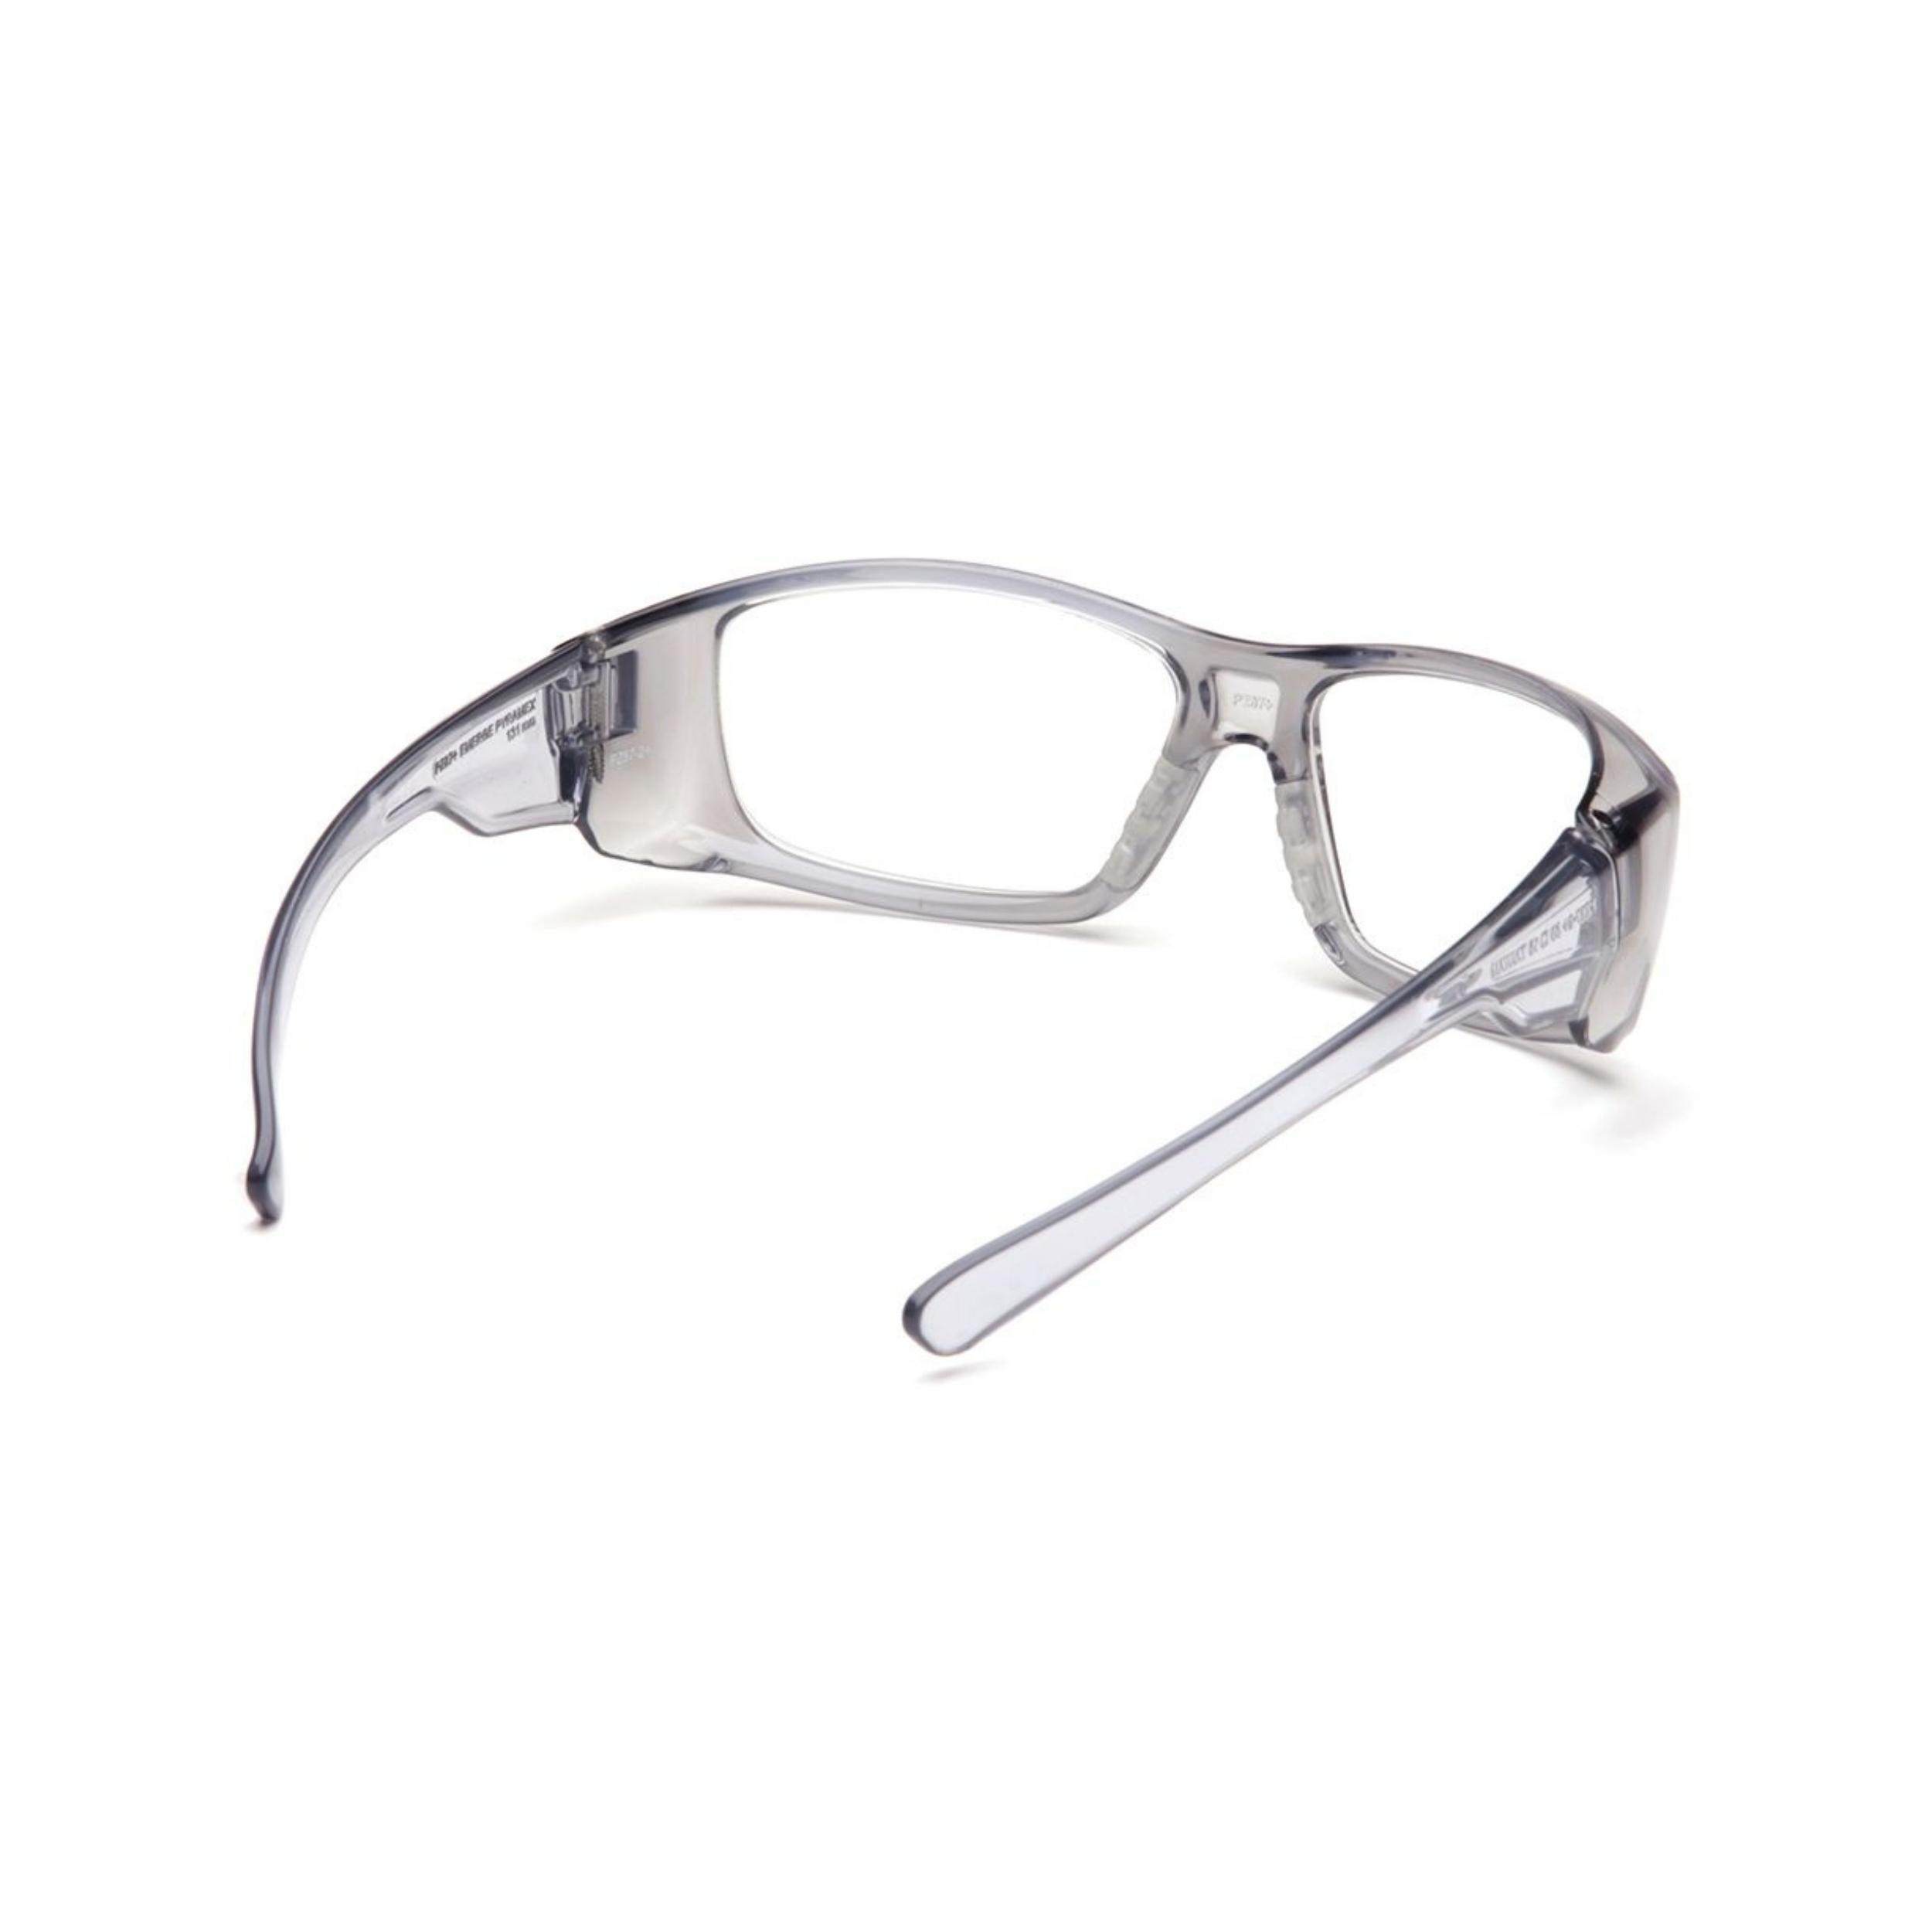 PYRAMEX-SG7910D15 Clear +1.5 Lens with Gray Frame